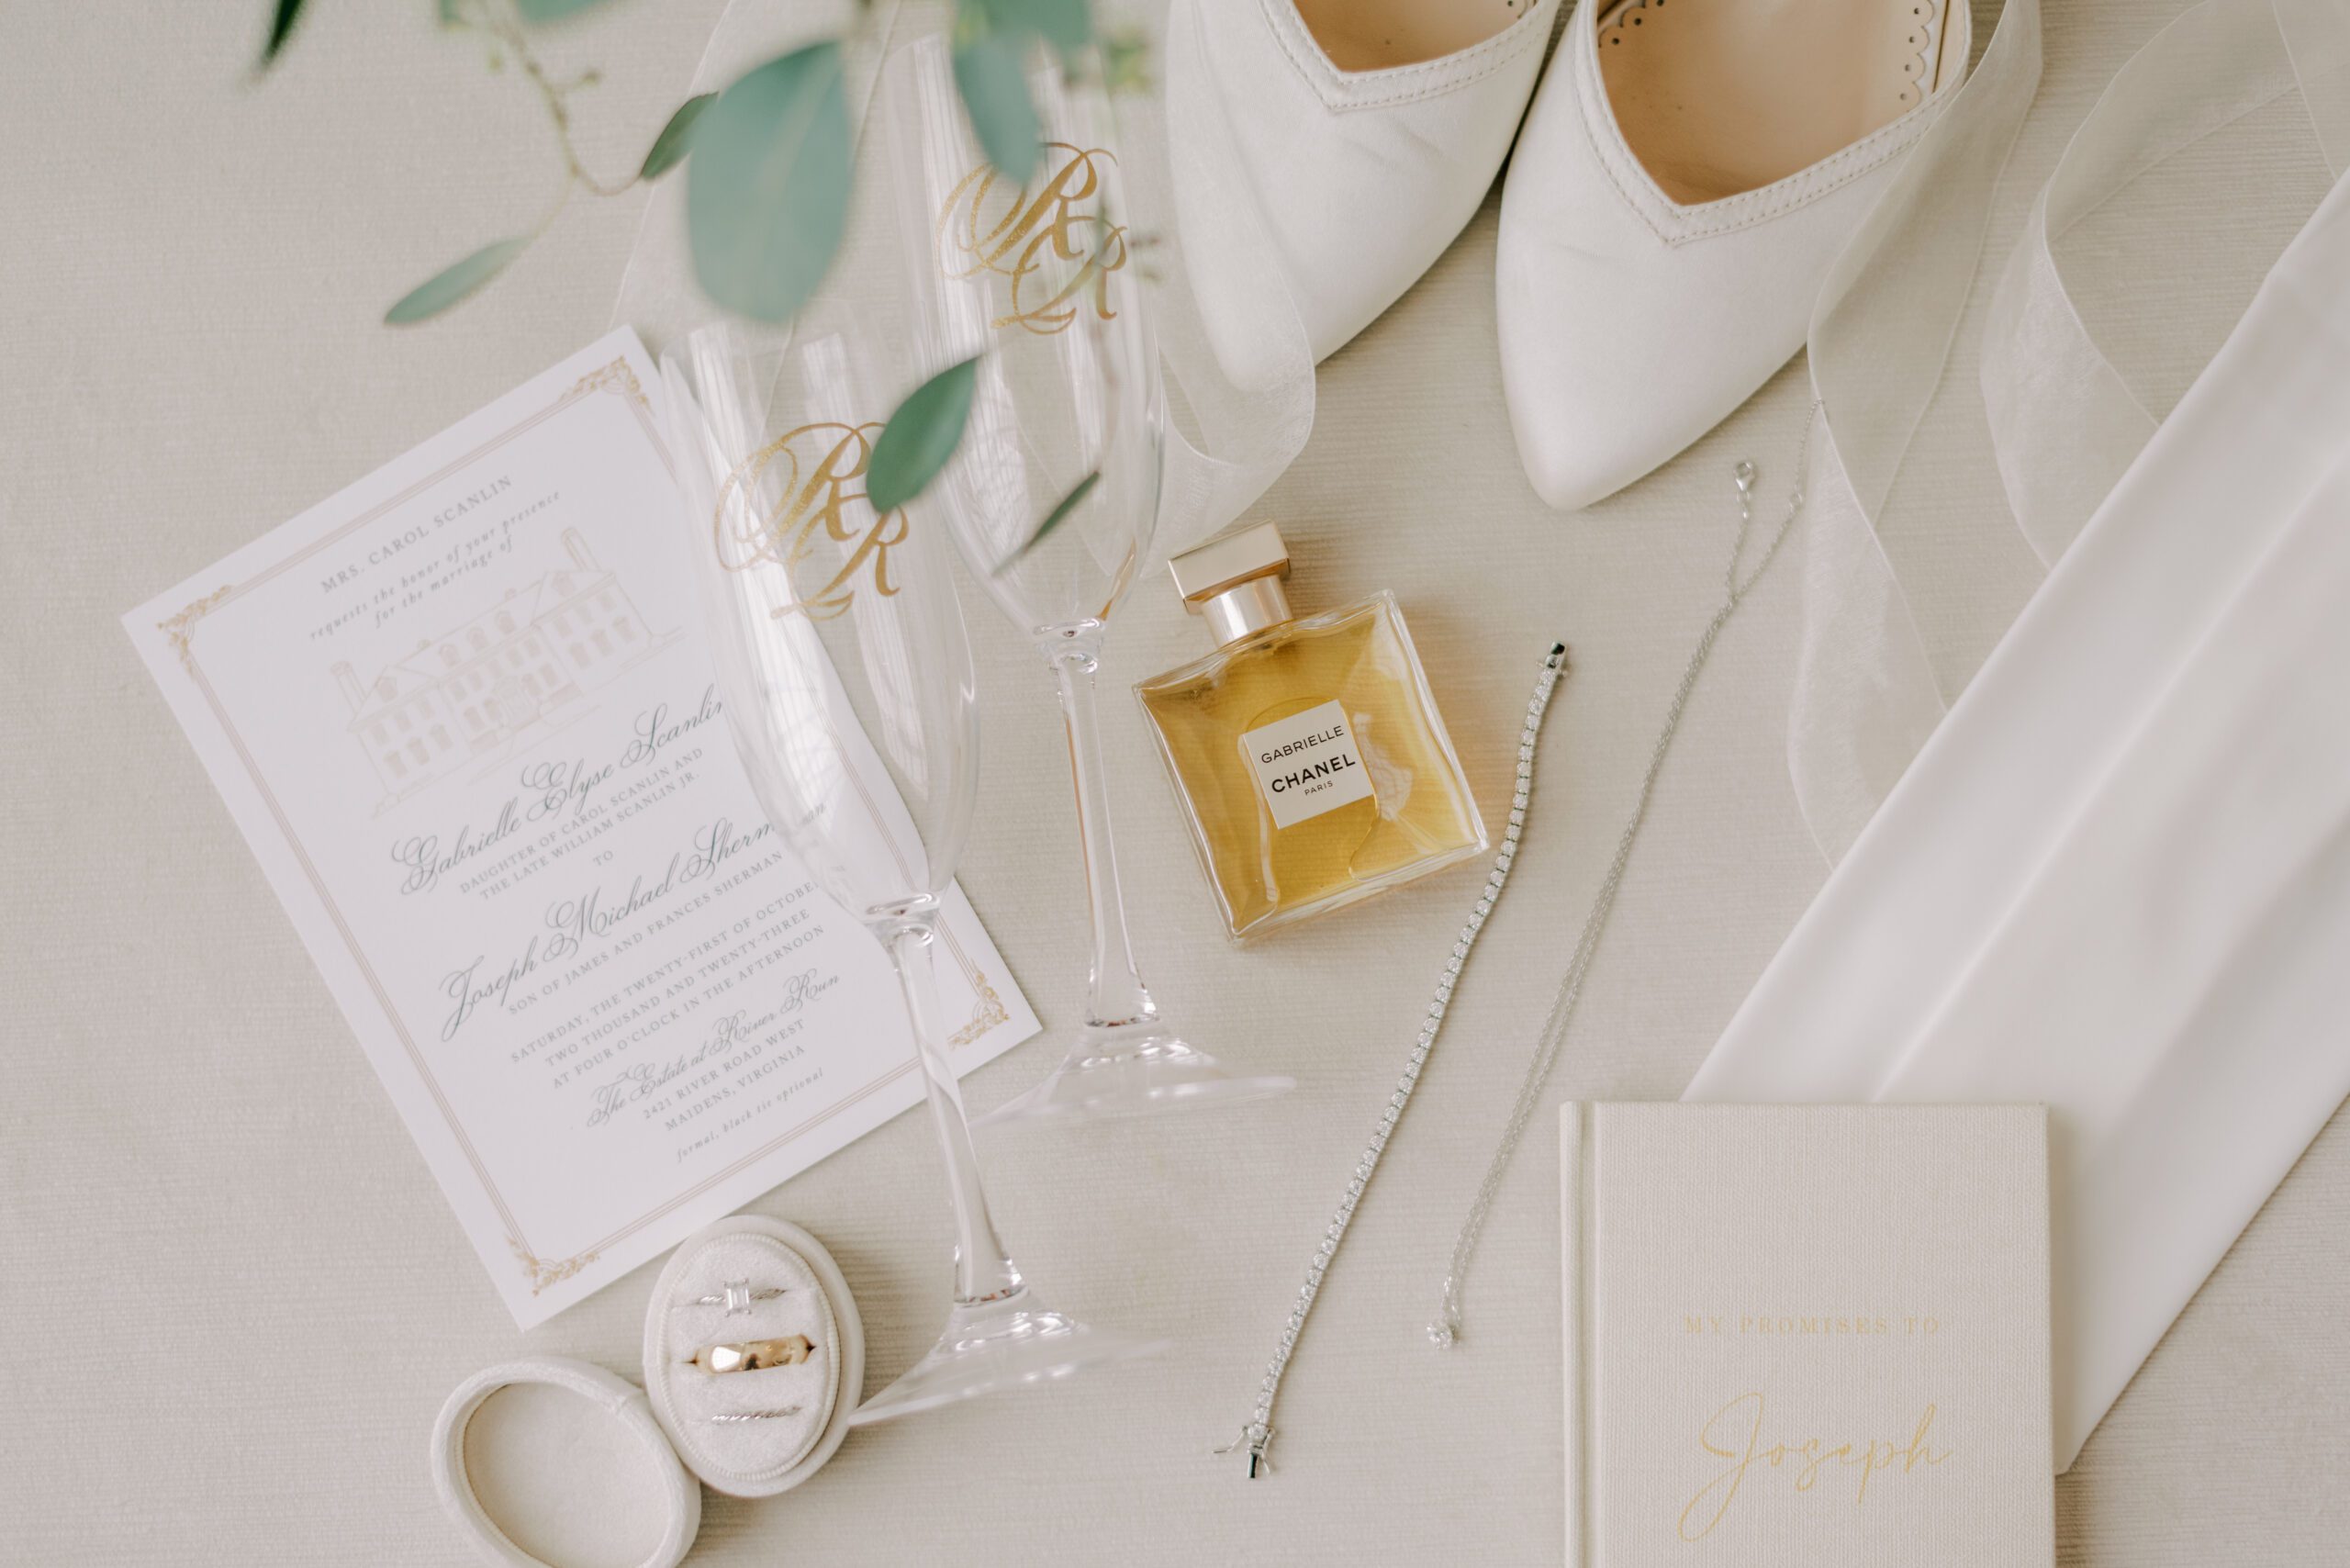 Detail photo of bride's perfume, shoes, jewelry, vow book, champagne glasses, and the wedding invitation